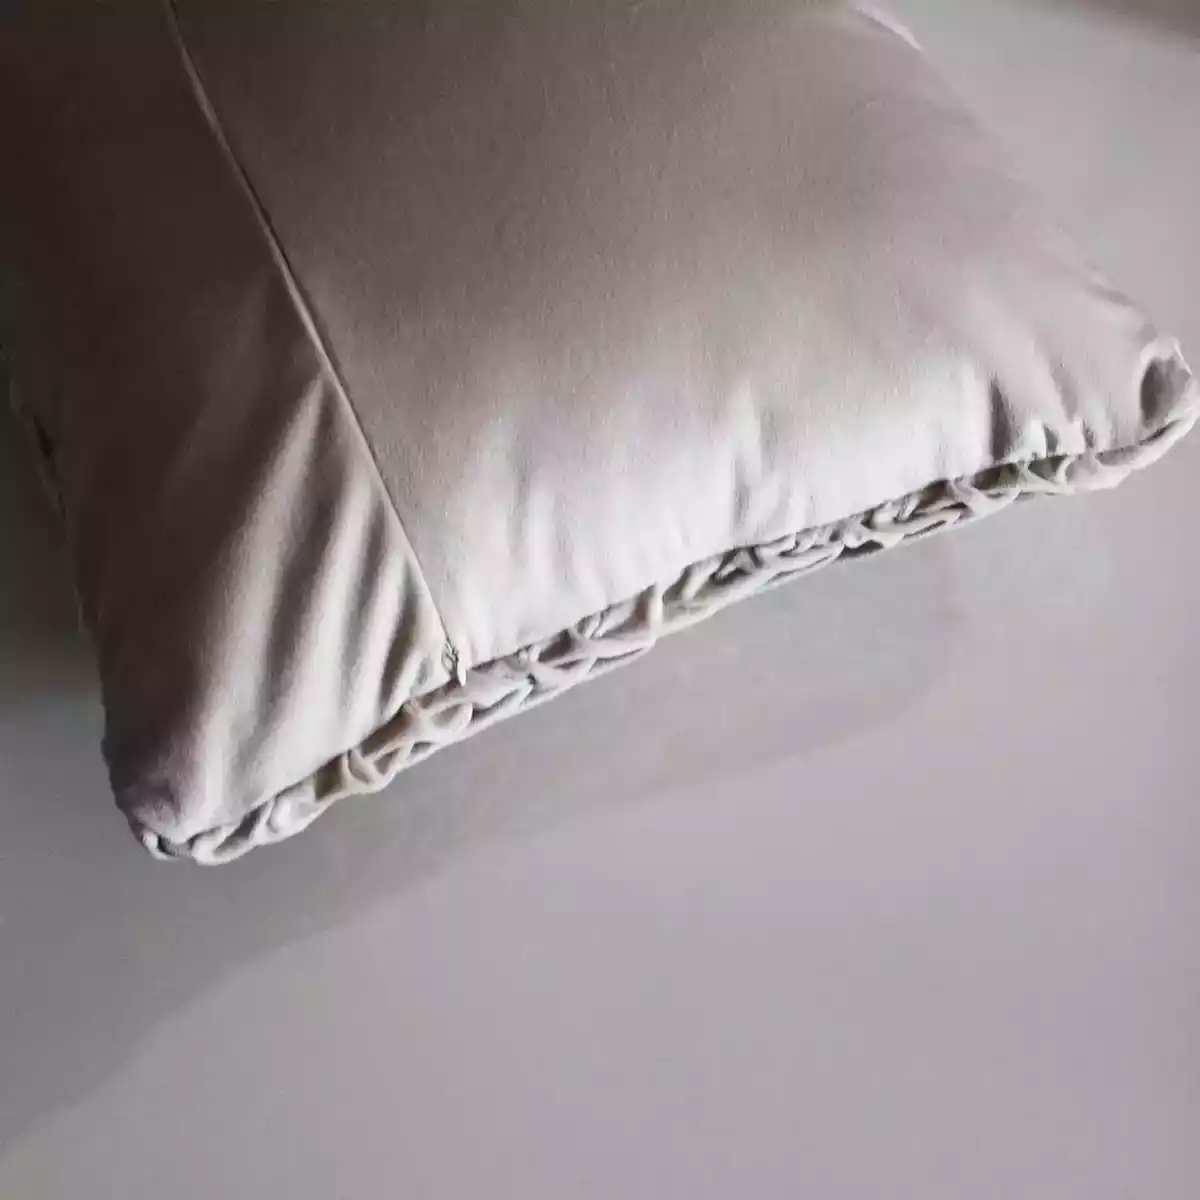 Corded Wavy Suede Misty Ivory Cushion Cover